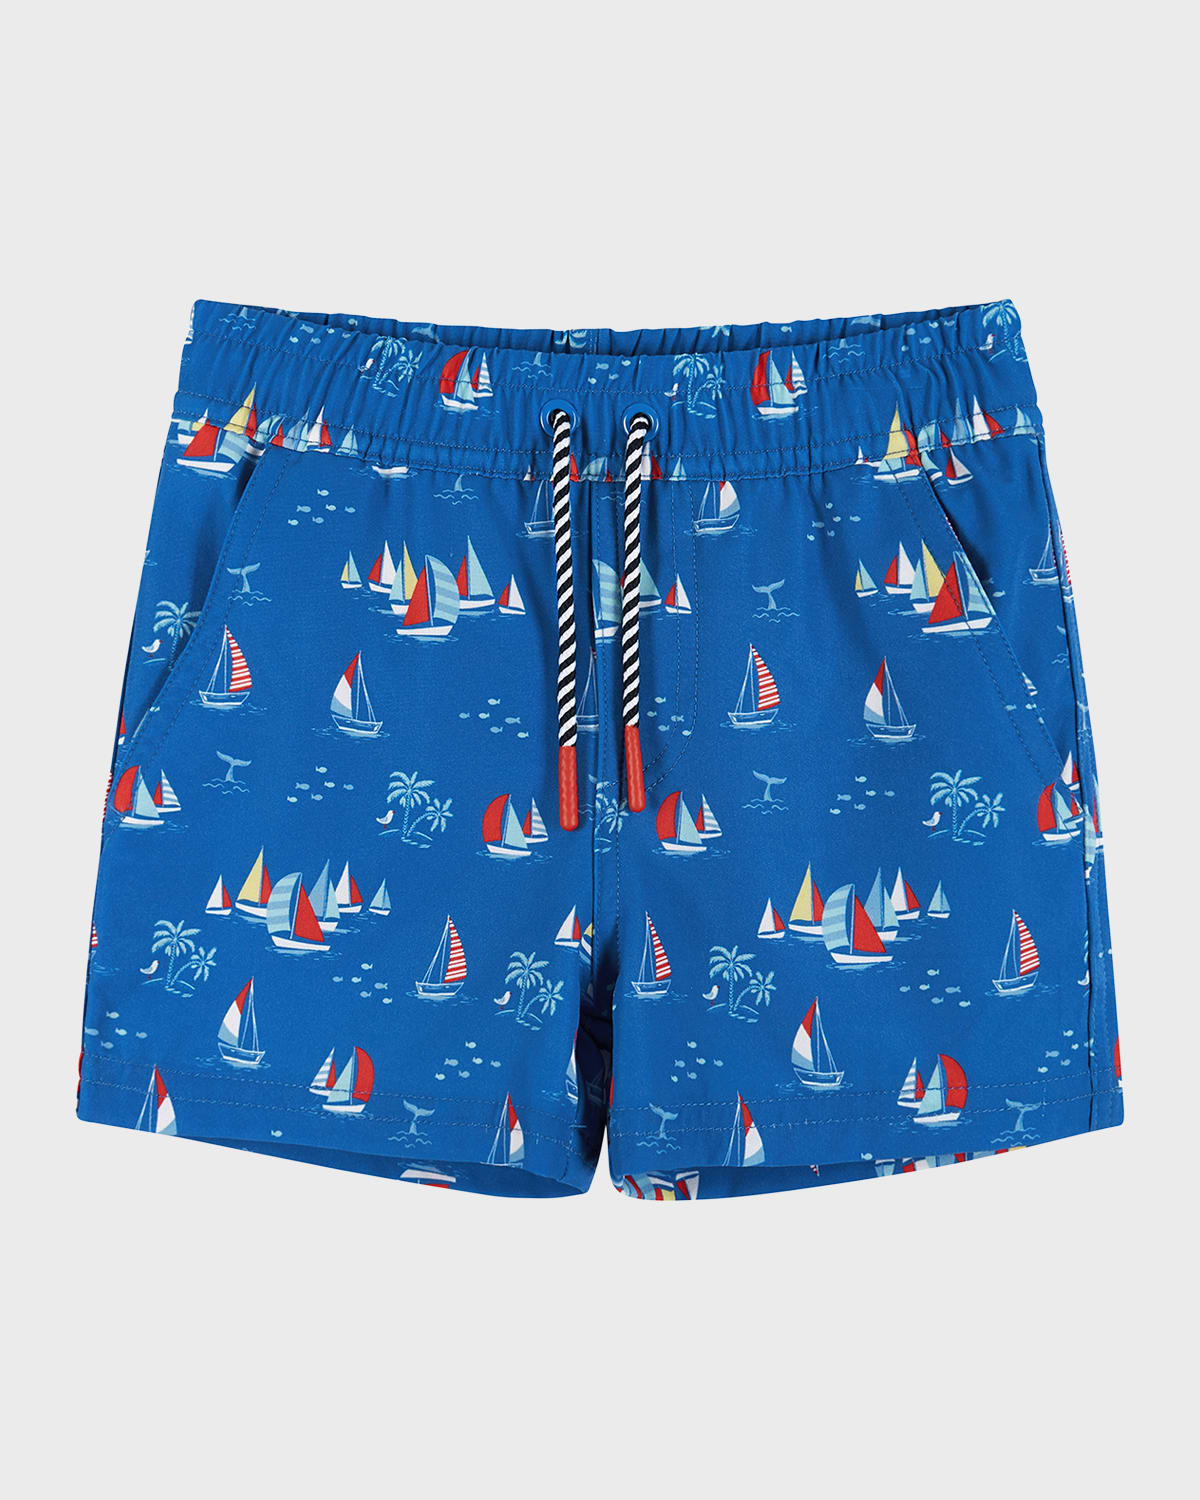 Andy & Evan Kids' Boy's Printed Boardshorts In Blue Sailboat